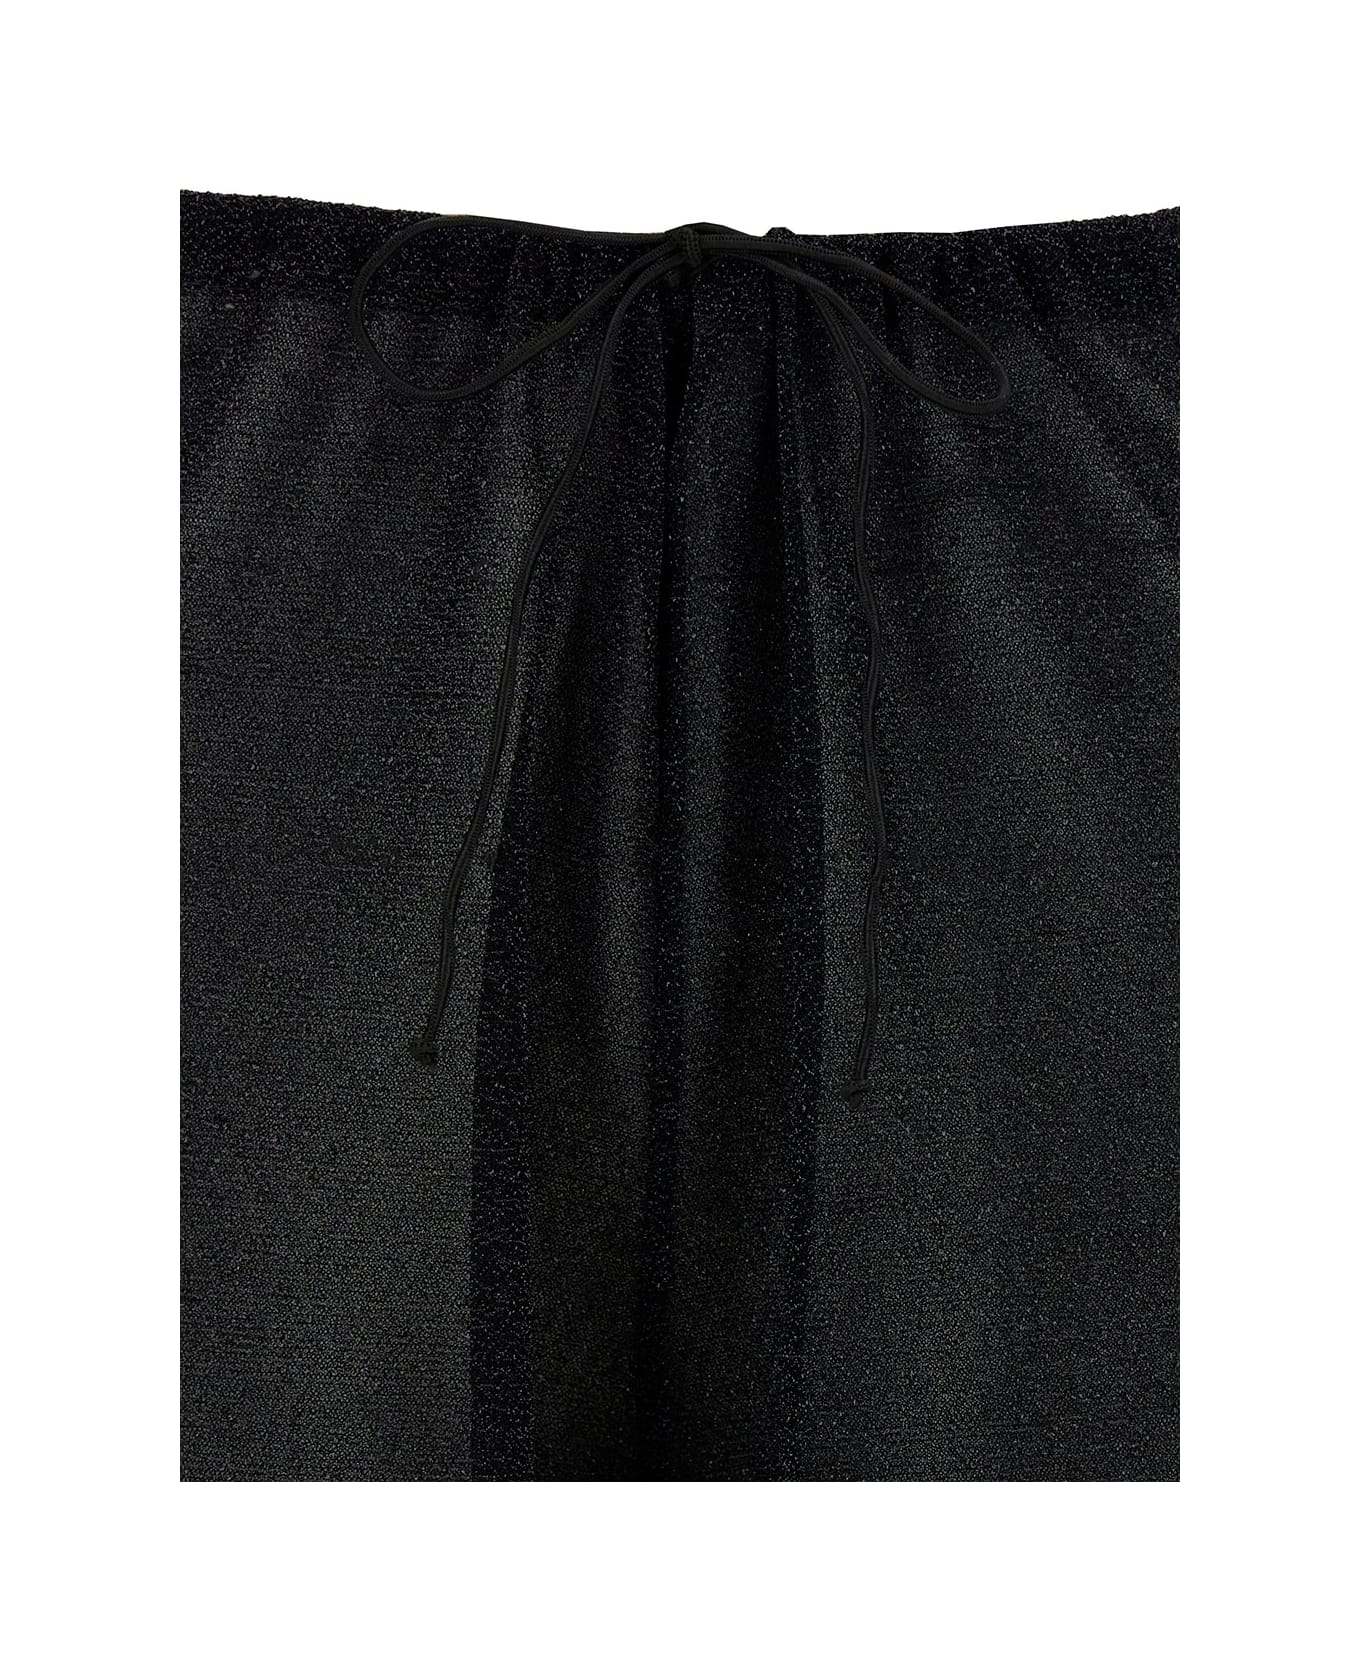 Oseree 'lumière Plumage' Black Pants With Feathers And Drawstring In Polyamide Blend Woman - Black